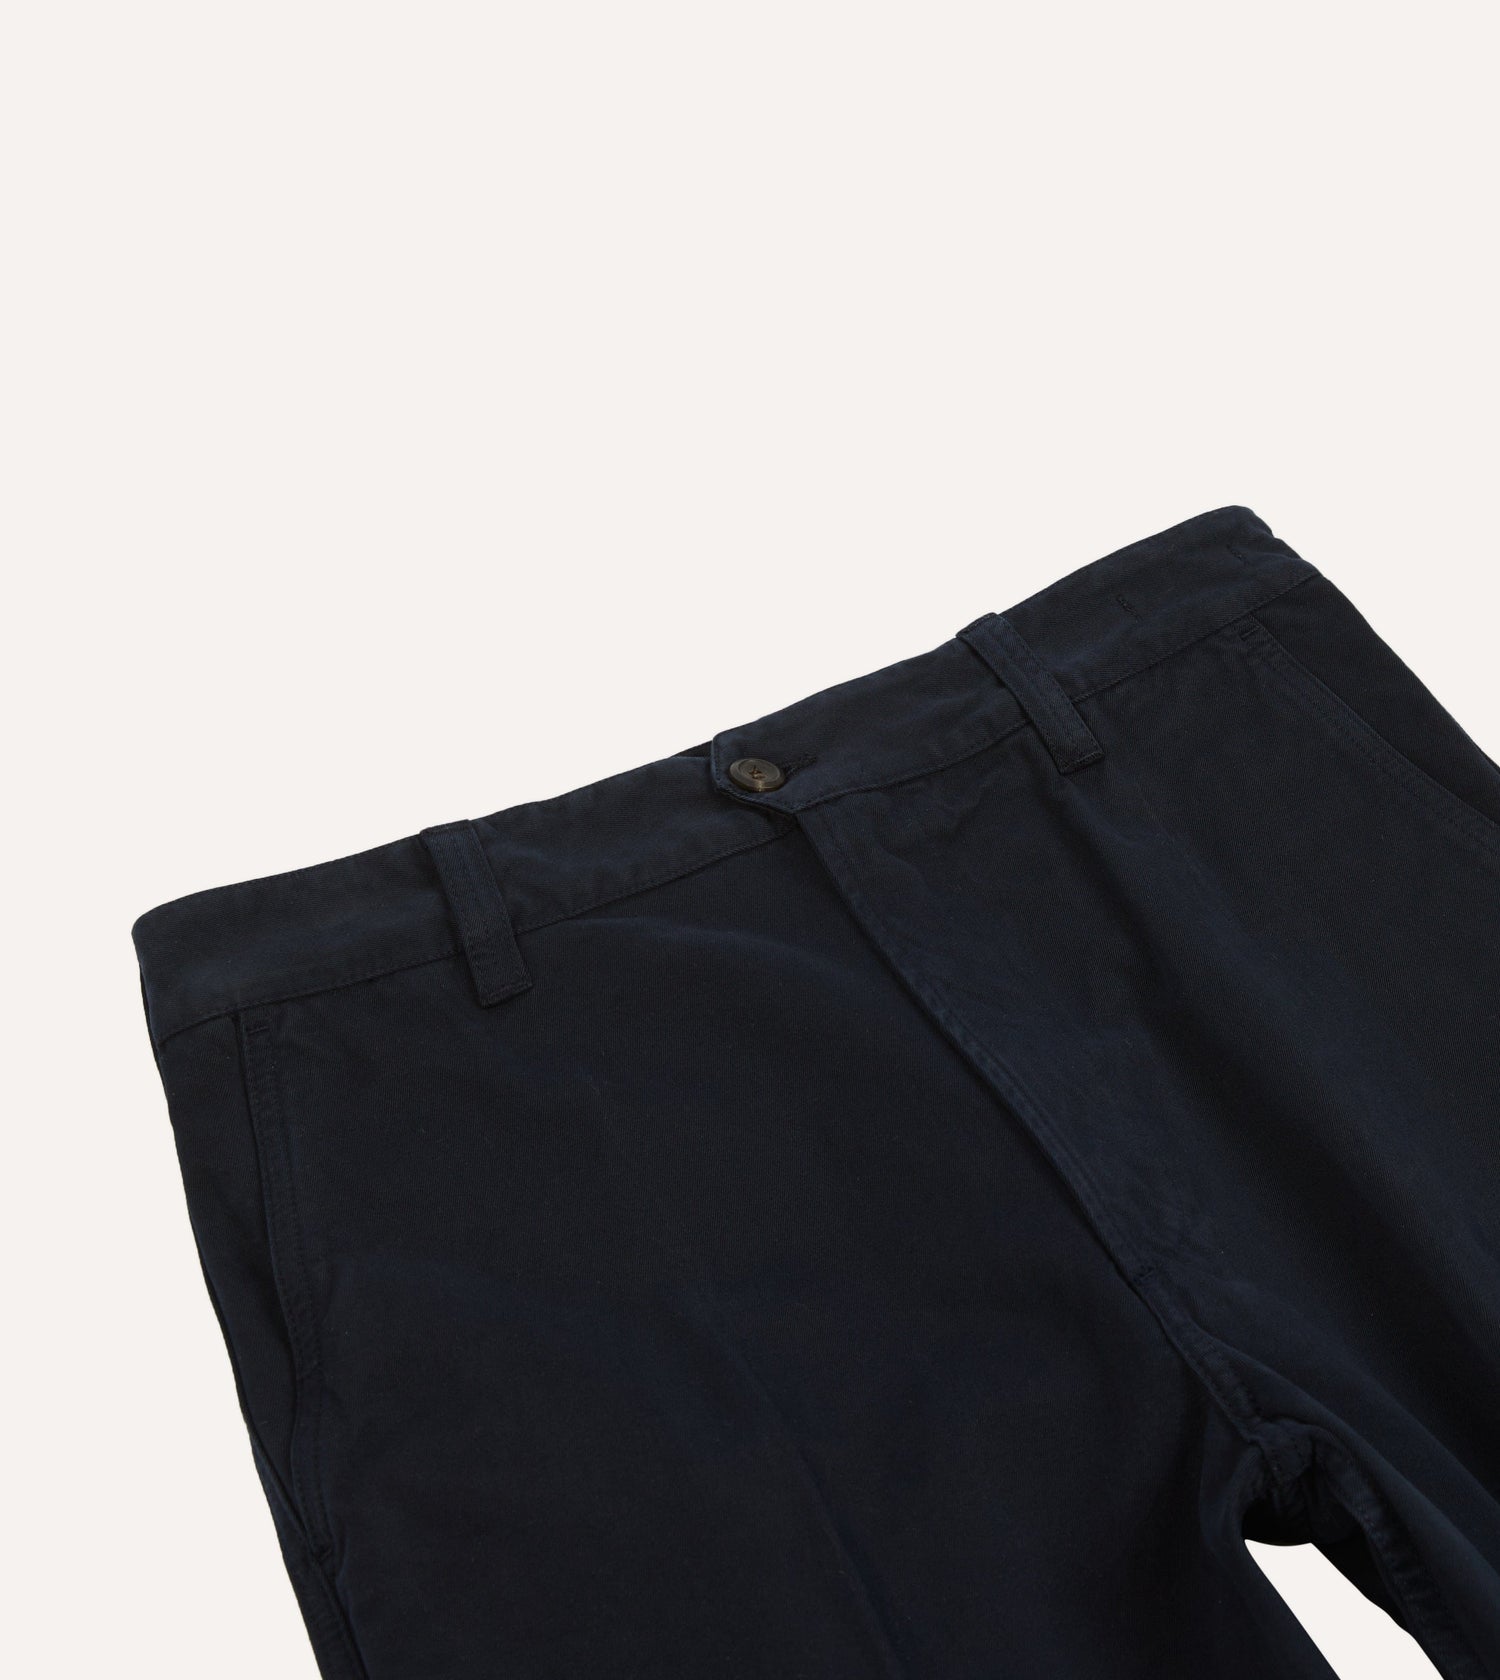 Navy Textured Cotton Flat Front Chino